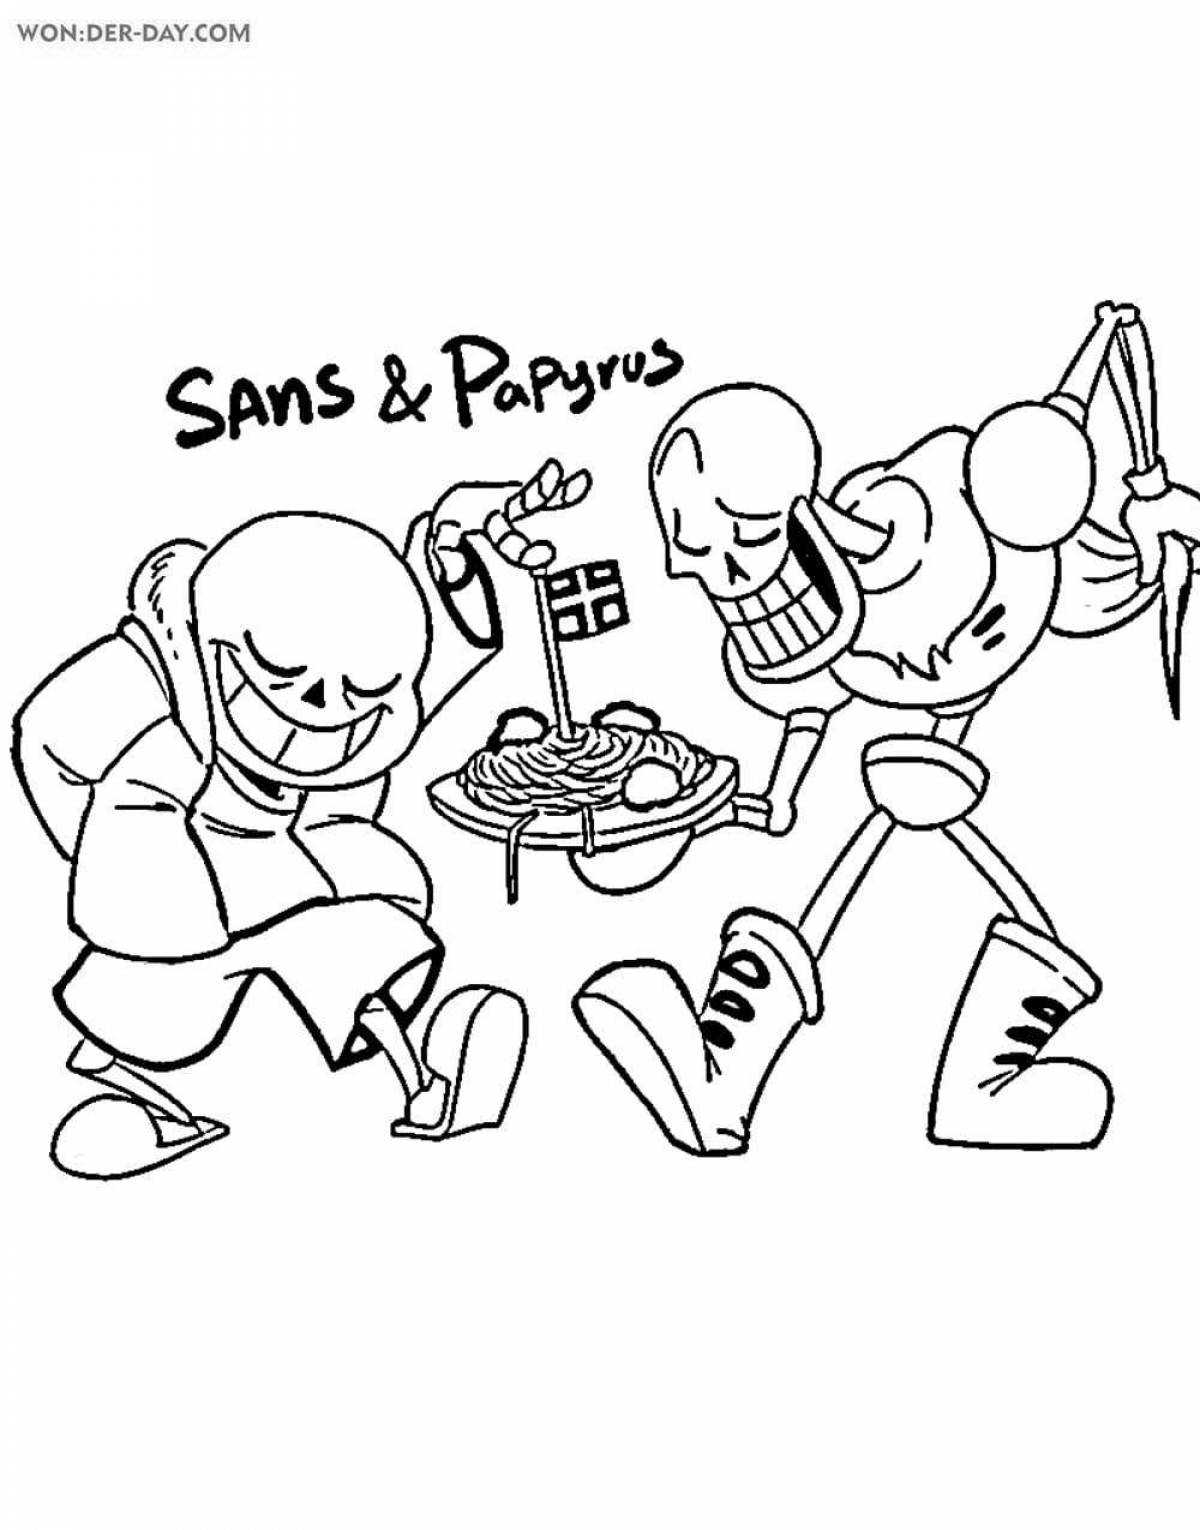 Glowing papyrus and sans coloring page